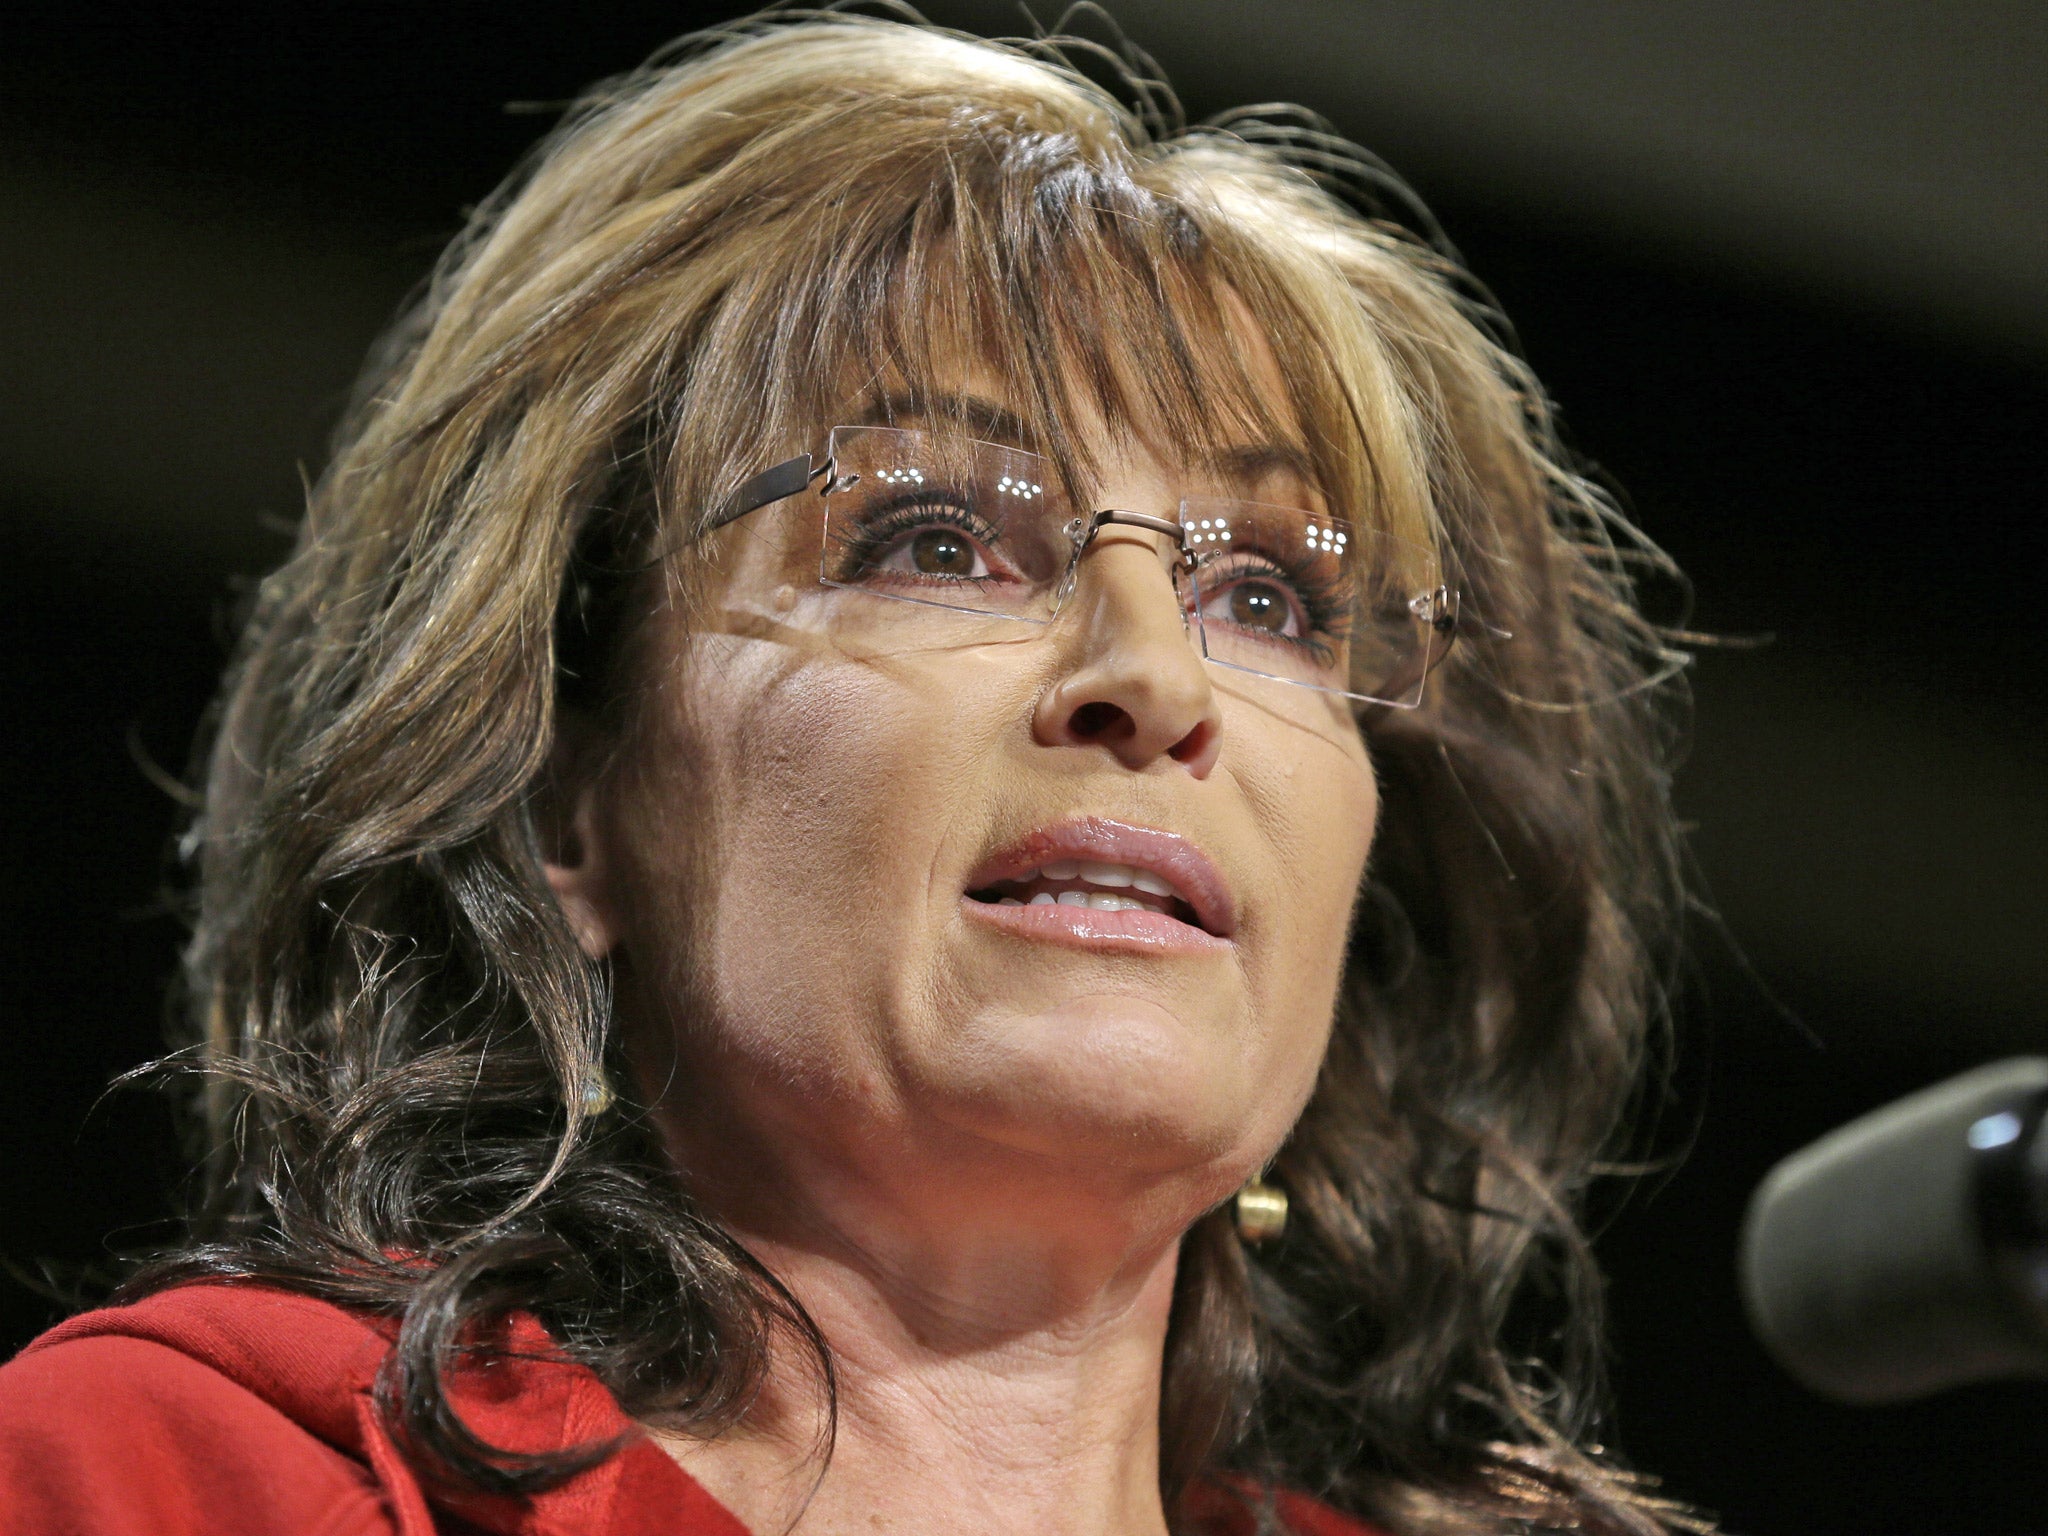 Sarah Palin has launched her own television channel